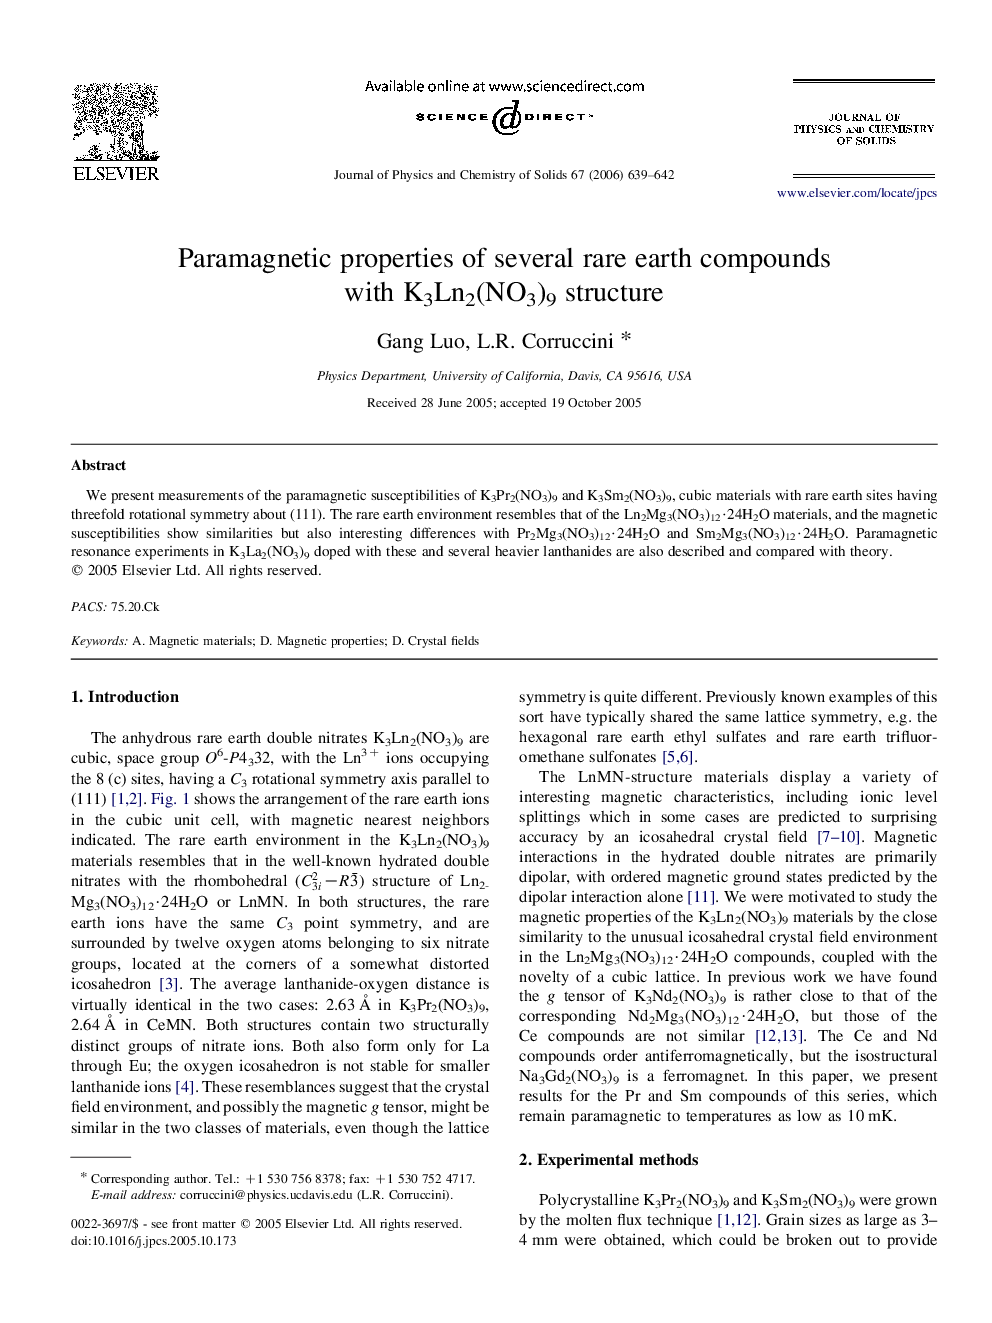 Paramagnetic properties of several rare earth compounds with K3Ln2(NO3)9 structure